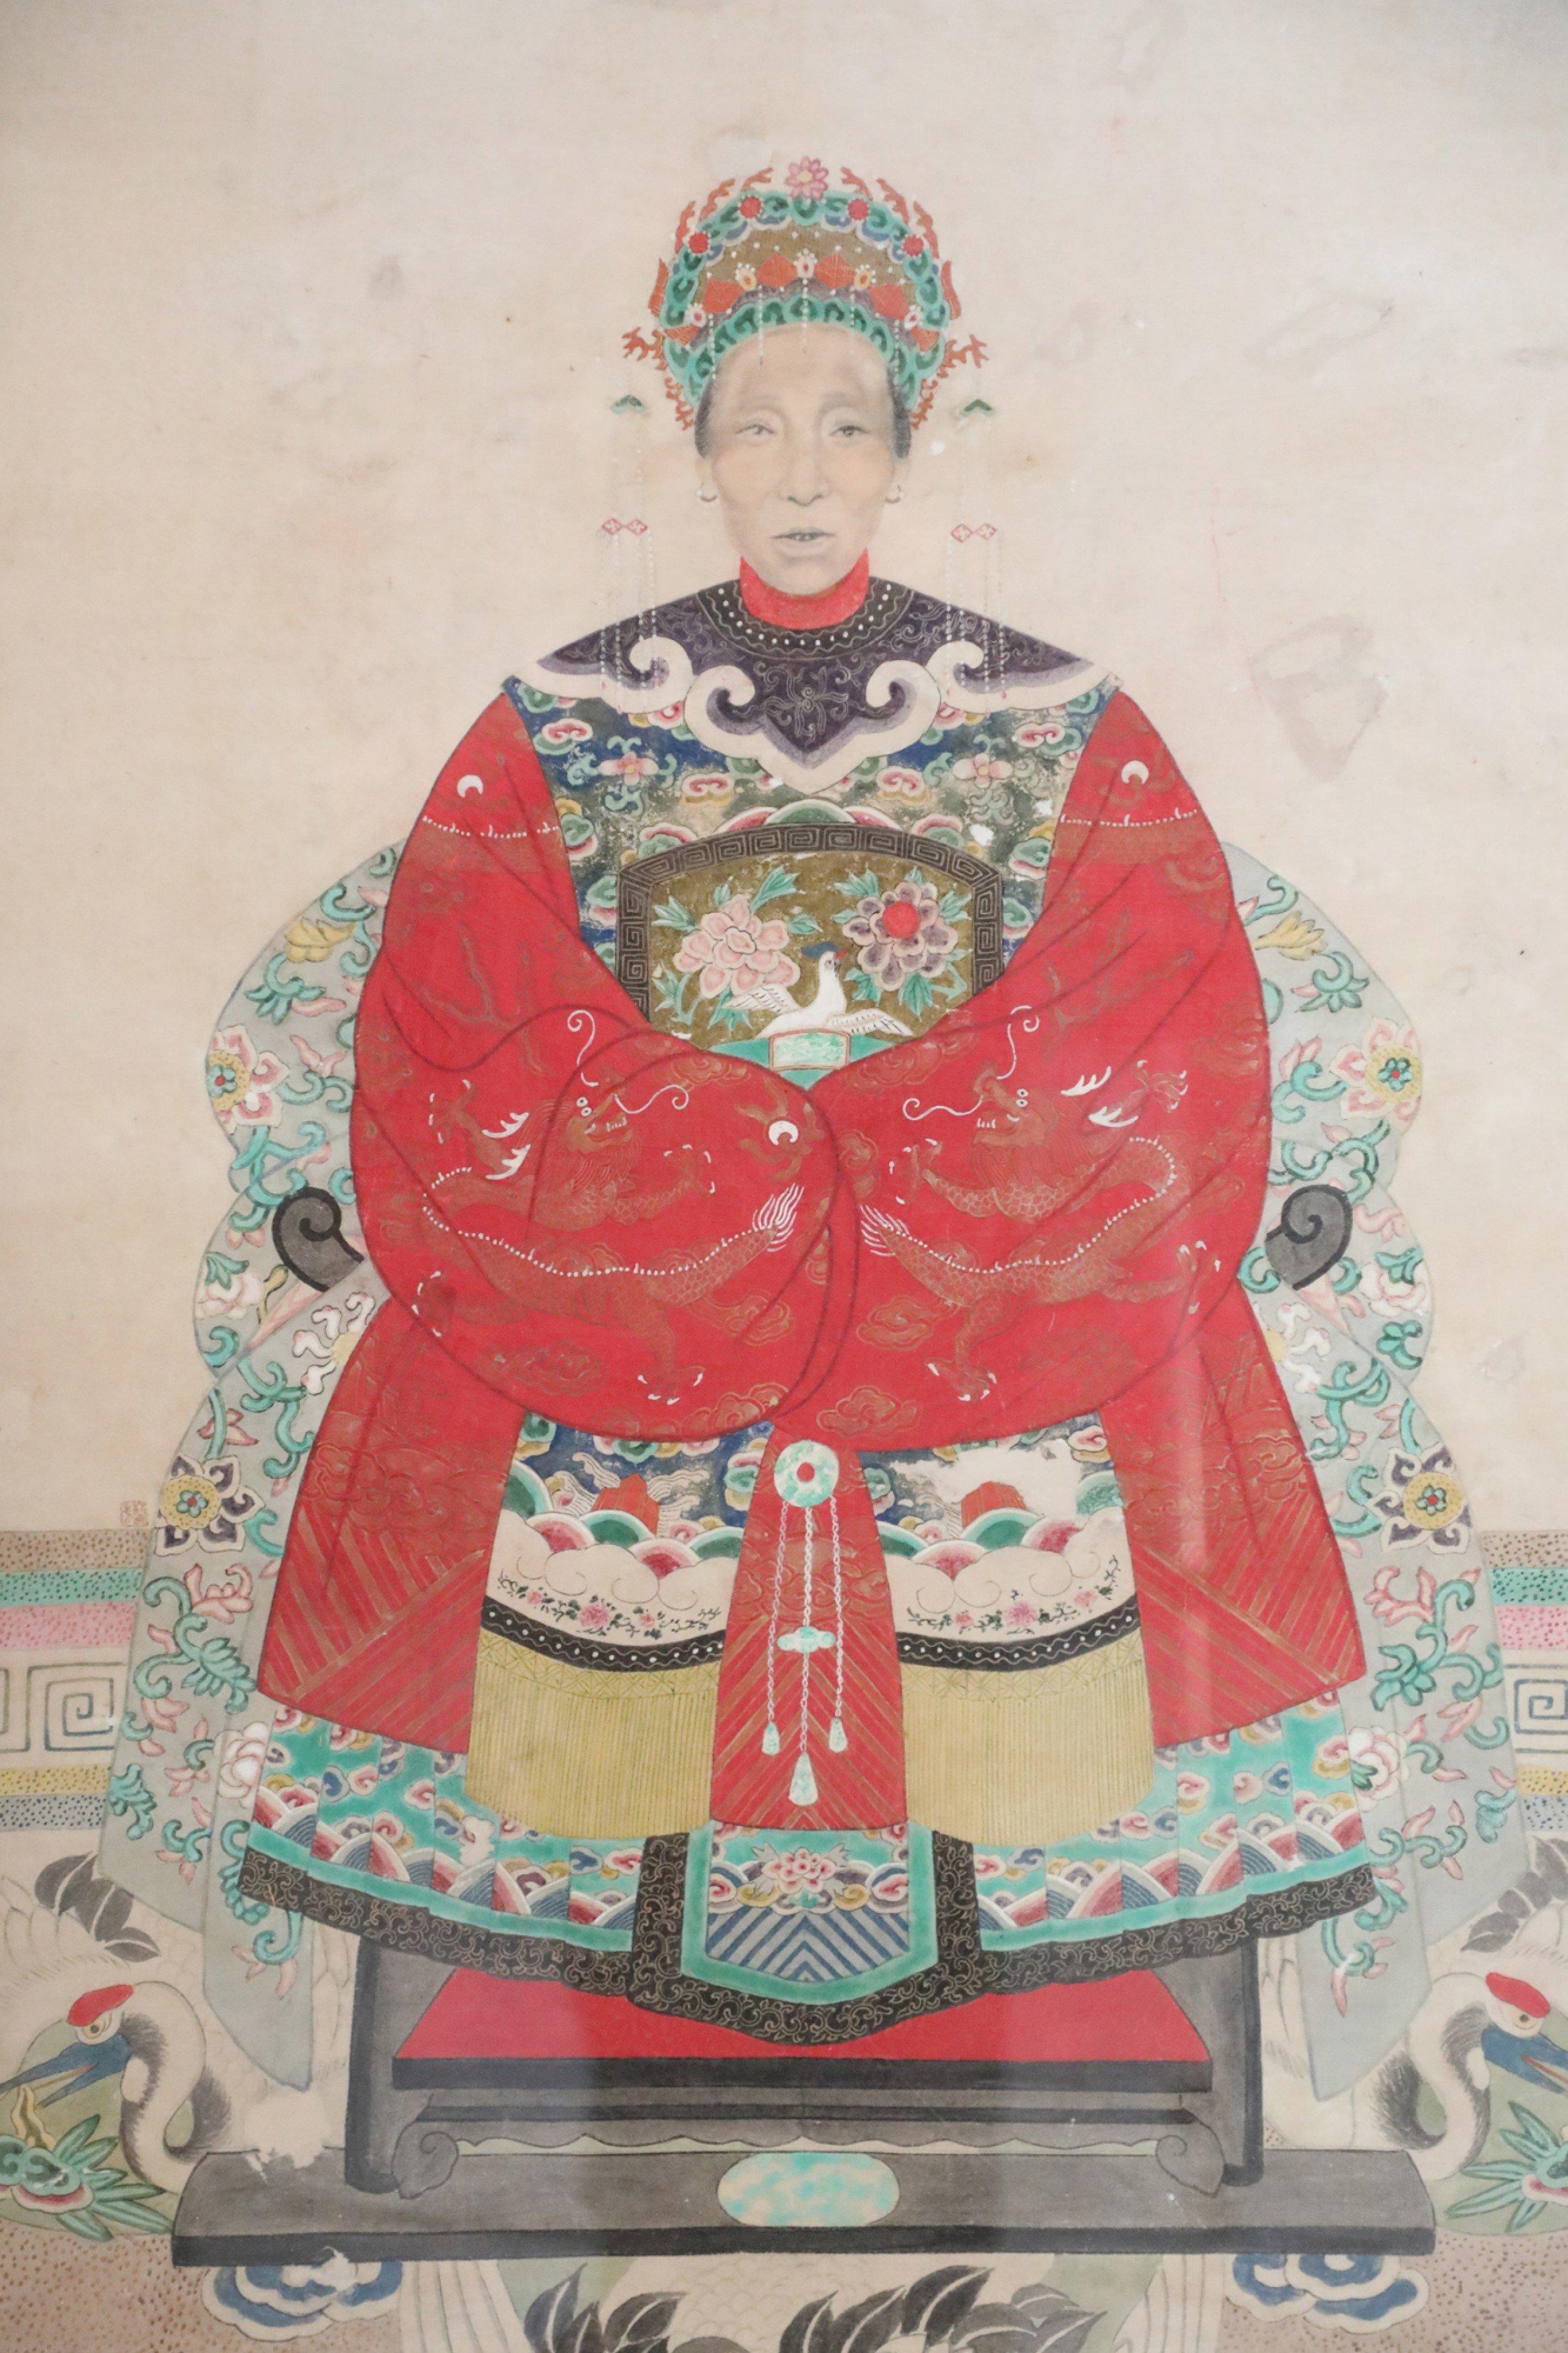 Special listing for mated pair Vintage (20th Century) Chinese ancestor portrait capturing the honoree seated and wearing an elaborate hat and red dress, on a beige background, and a floor patterned with several cranes, set in a rectangular wood